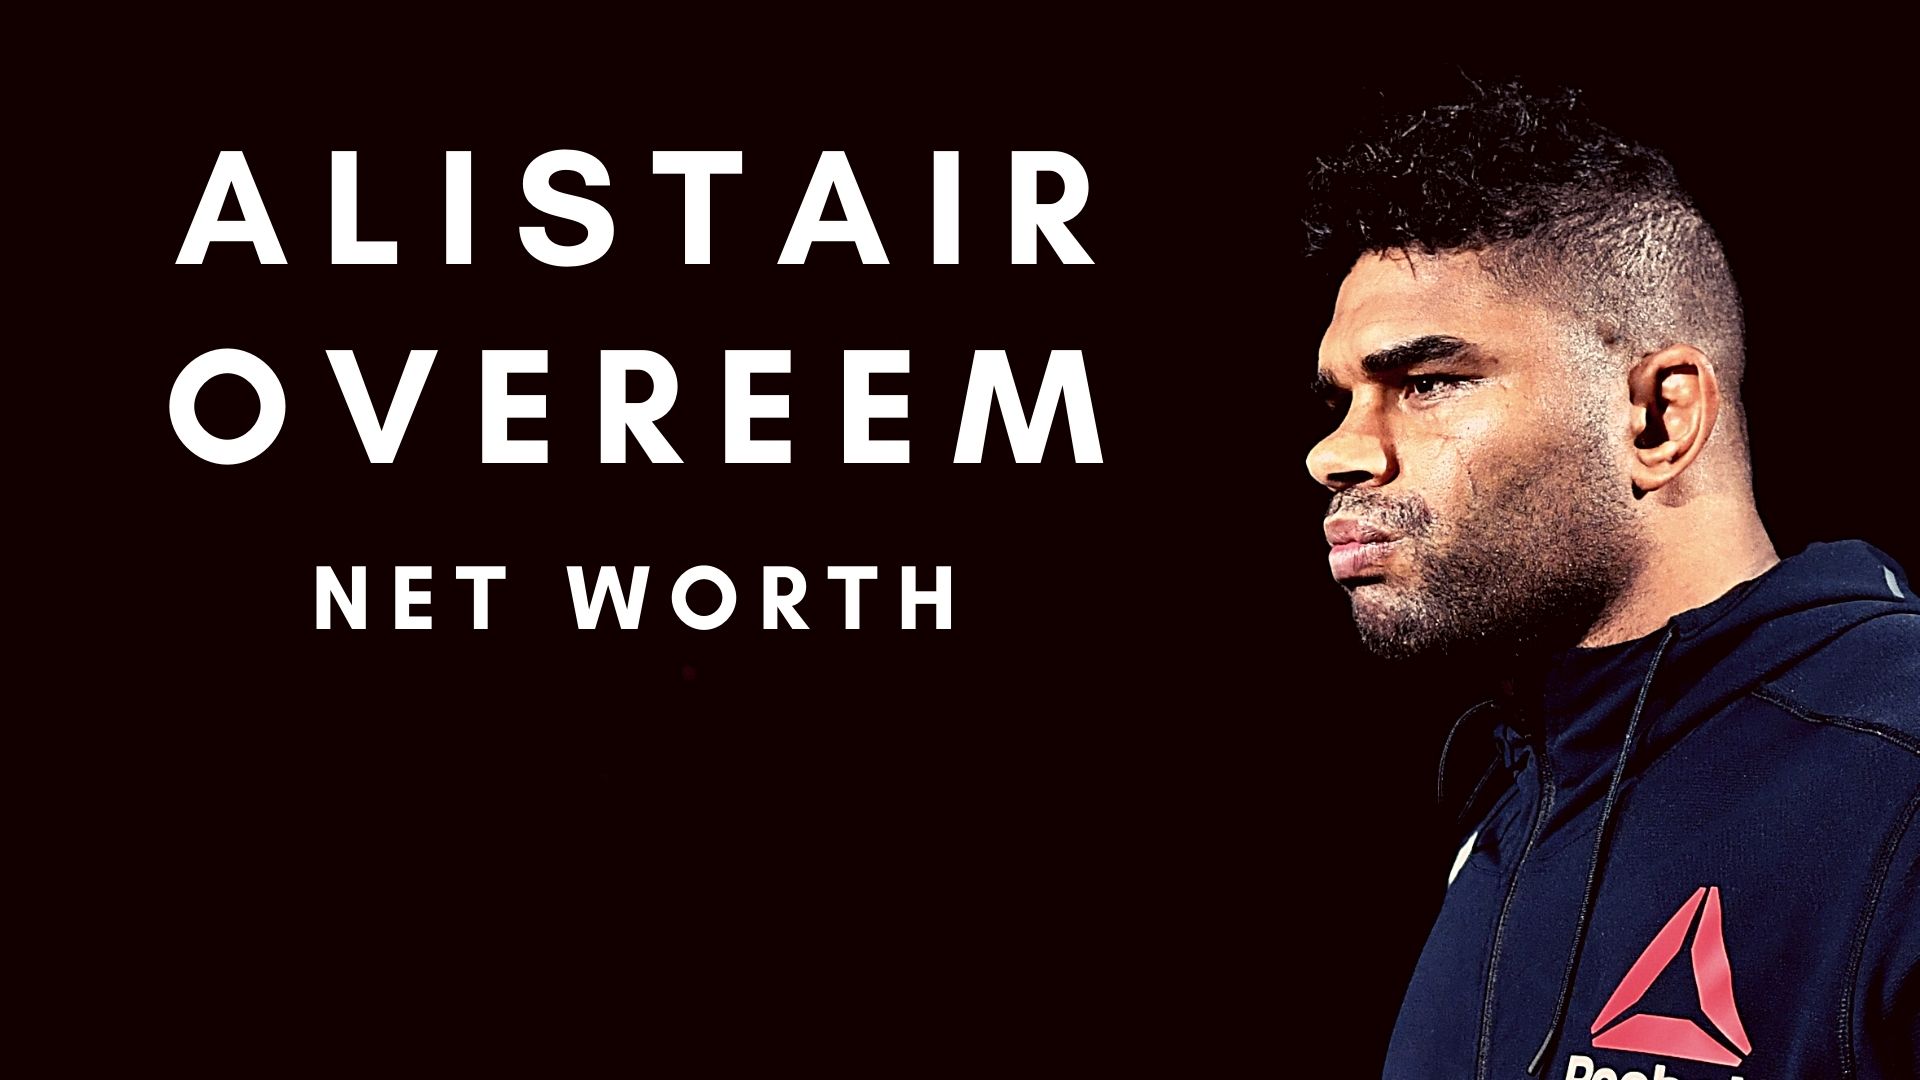 Alistair Overeem is one of the top stars in the UFC and here is all about his net worth, career, family and more